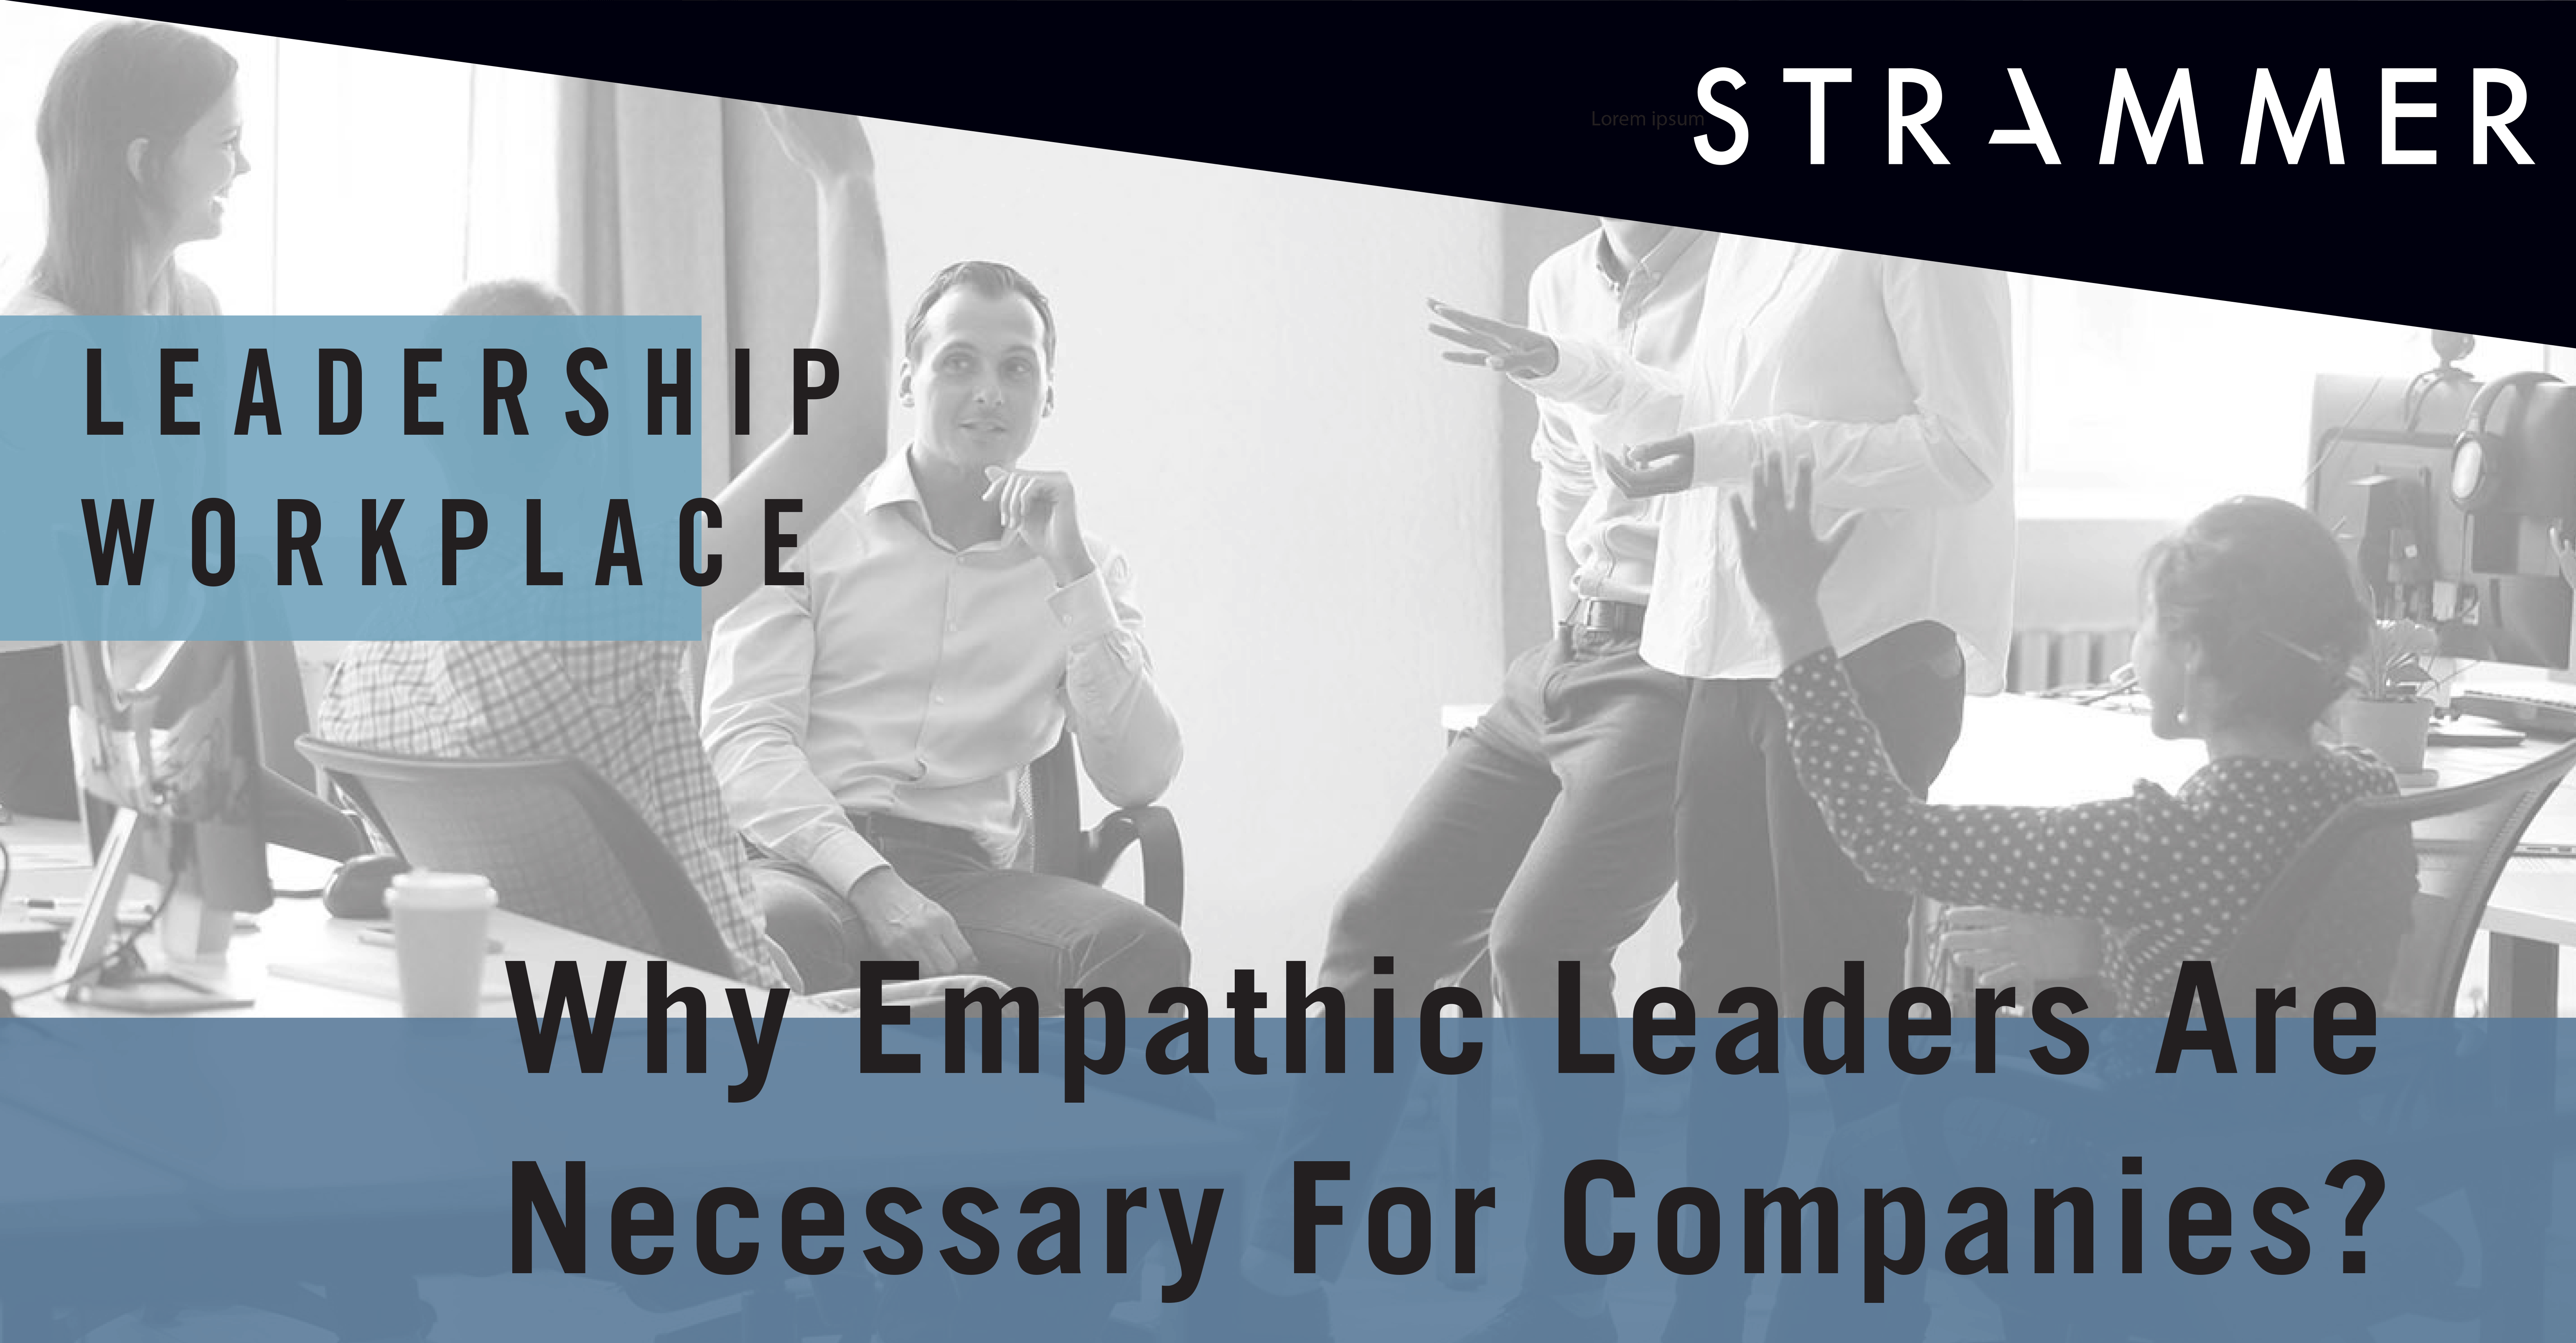 Empathetic Leaders: Why Are They so Important?